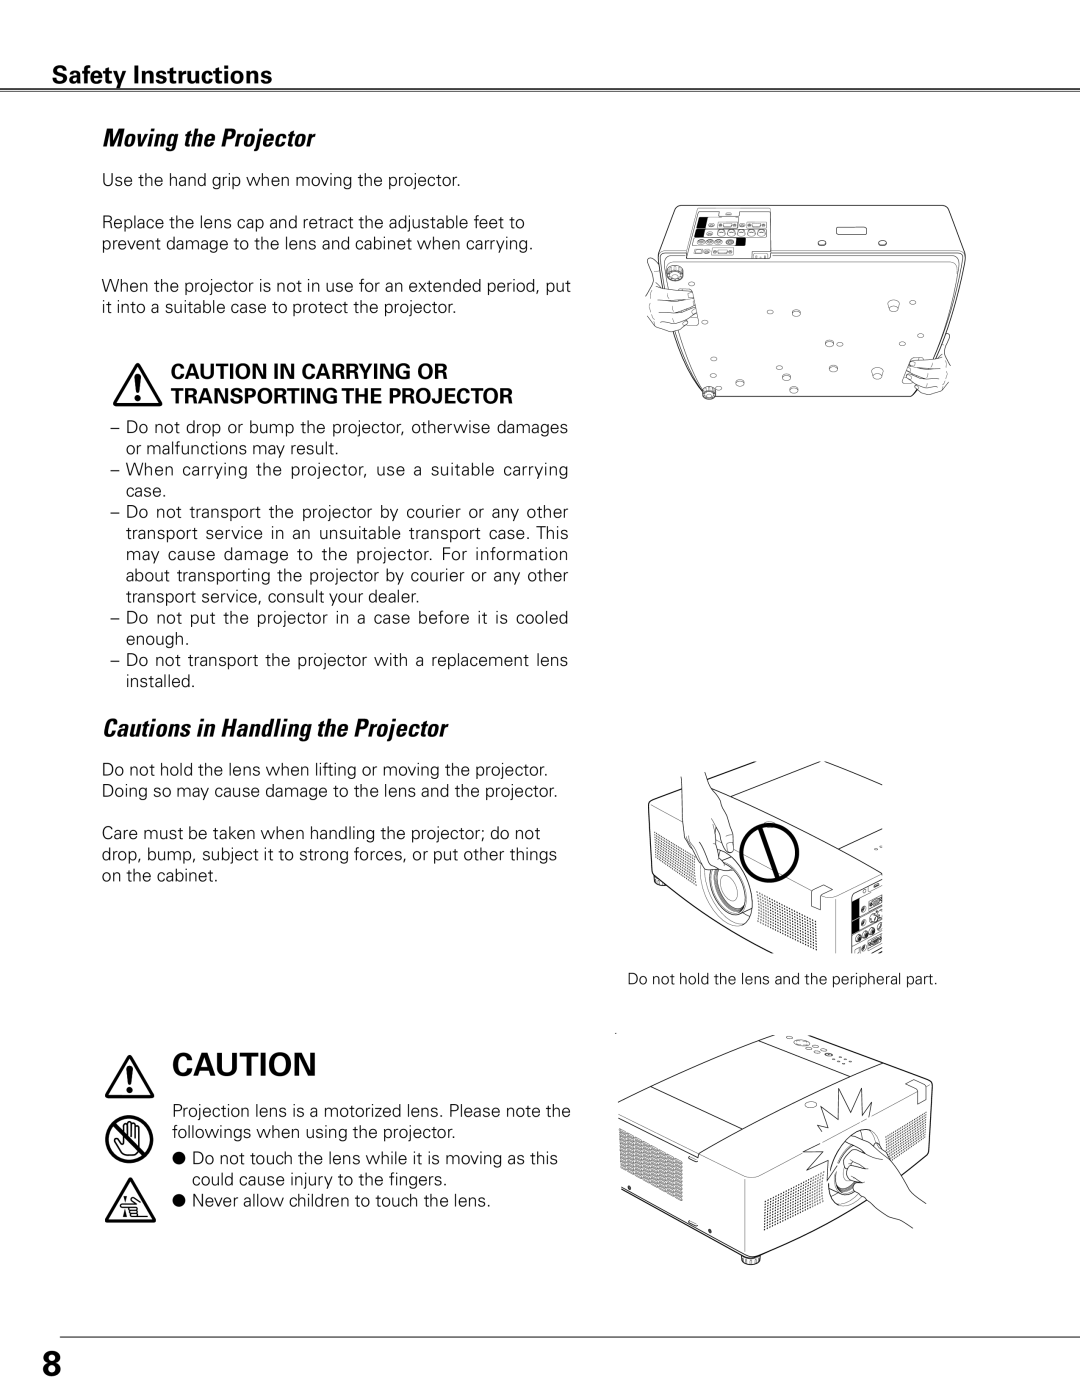 Sanyo WTC500L owner manual Moving the Projector, Cautions in Handling the Projector, Safety Instructions 